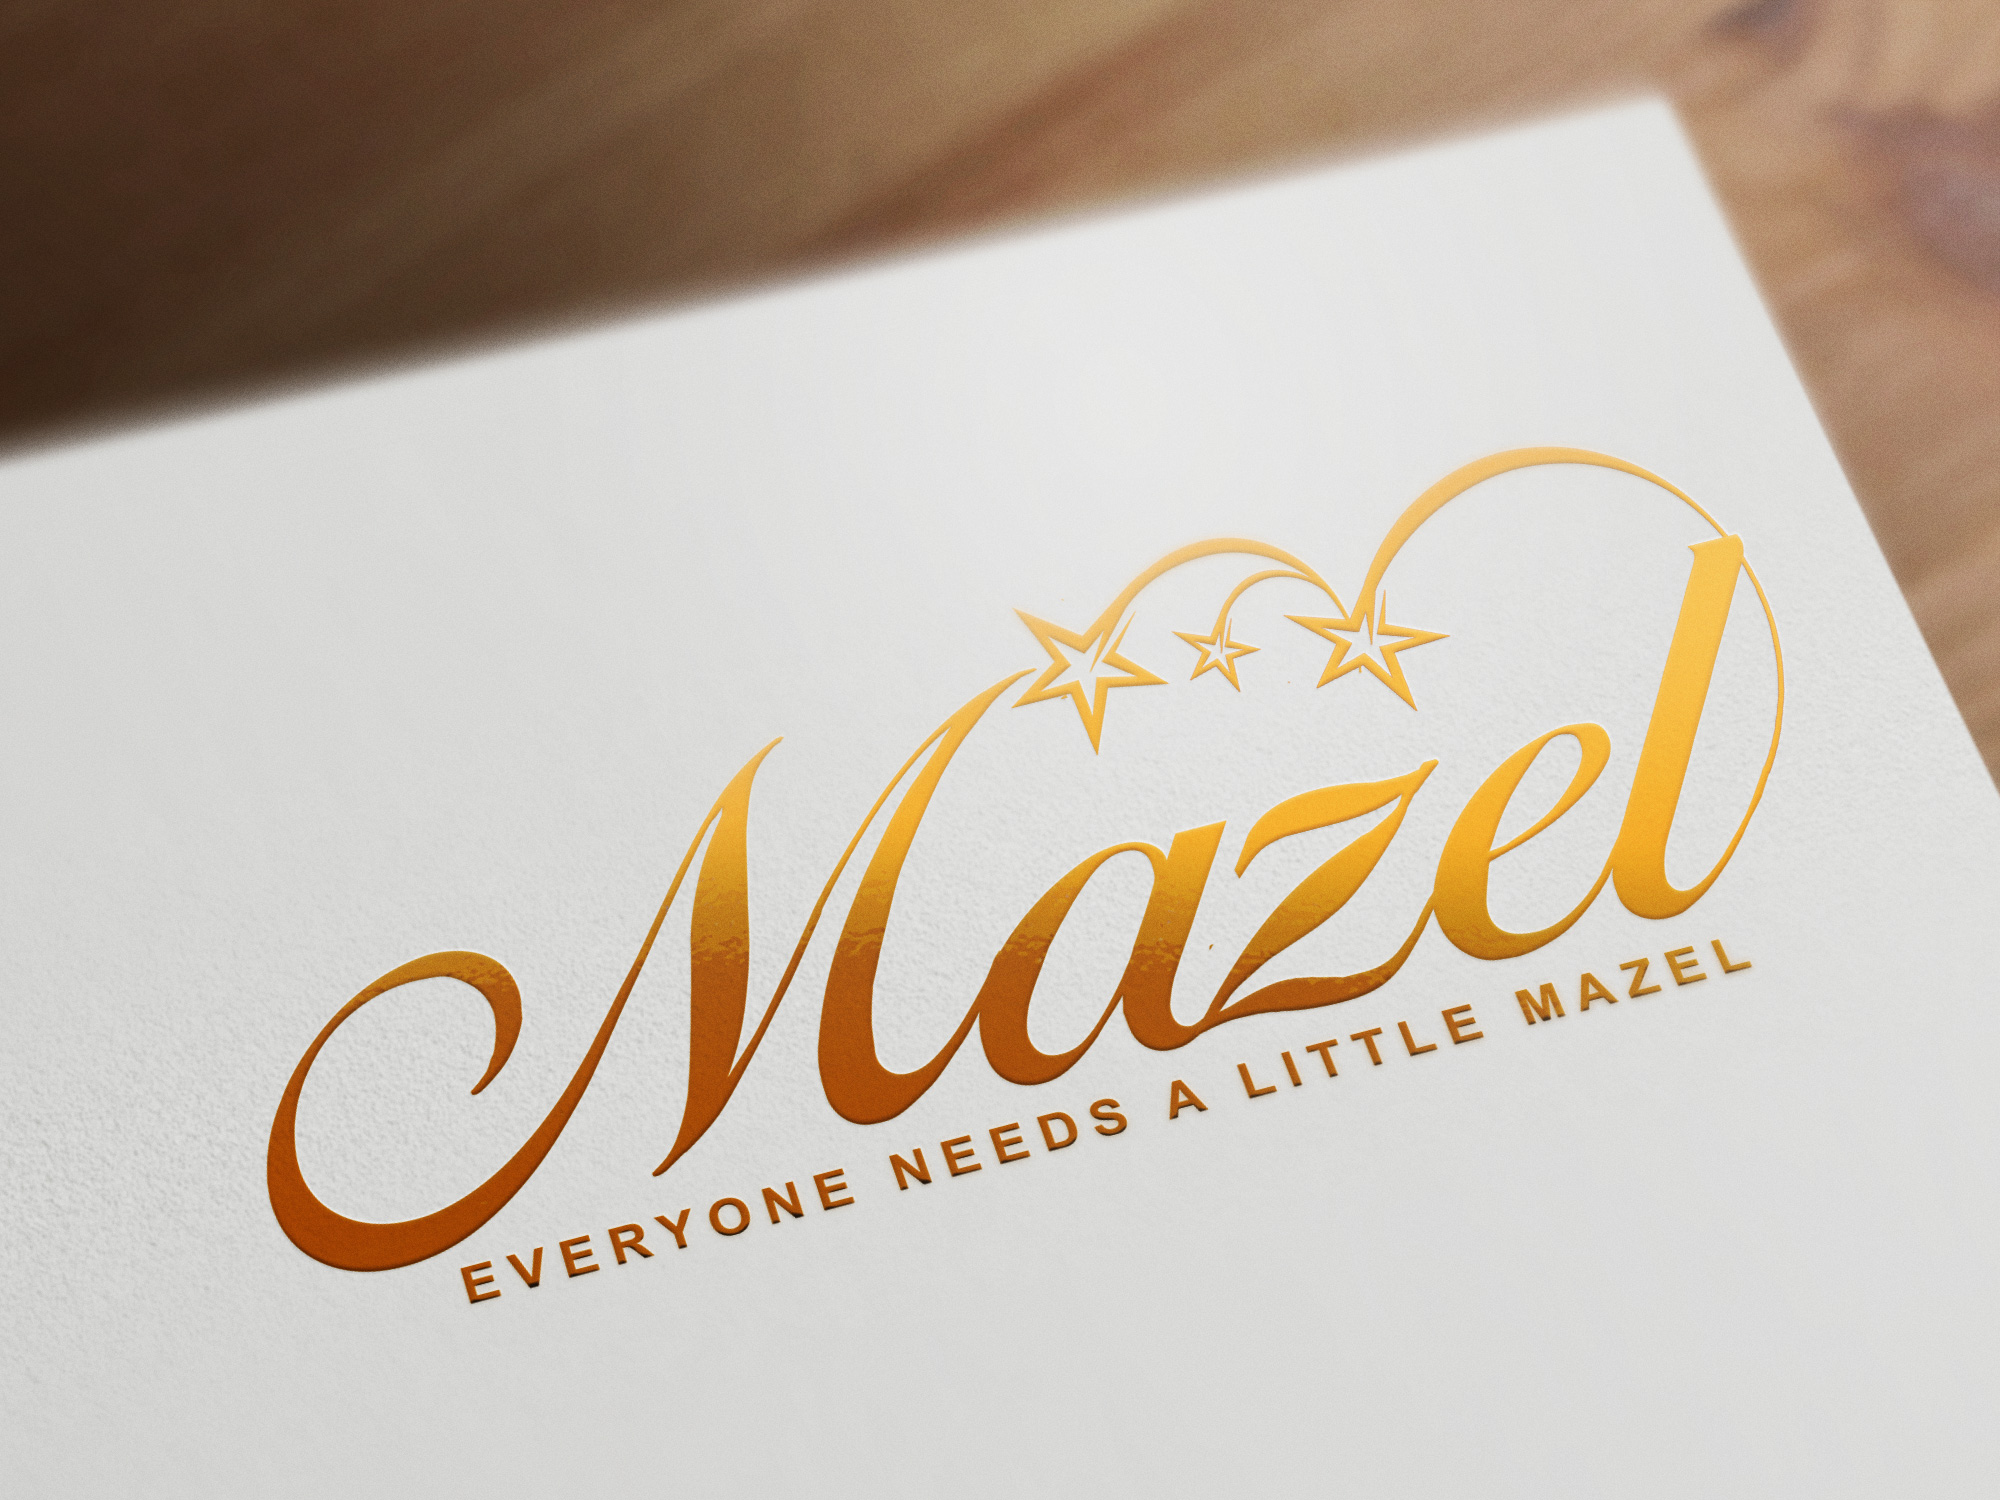 'Cause Mazel Means Good Luck